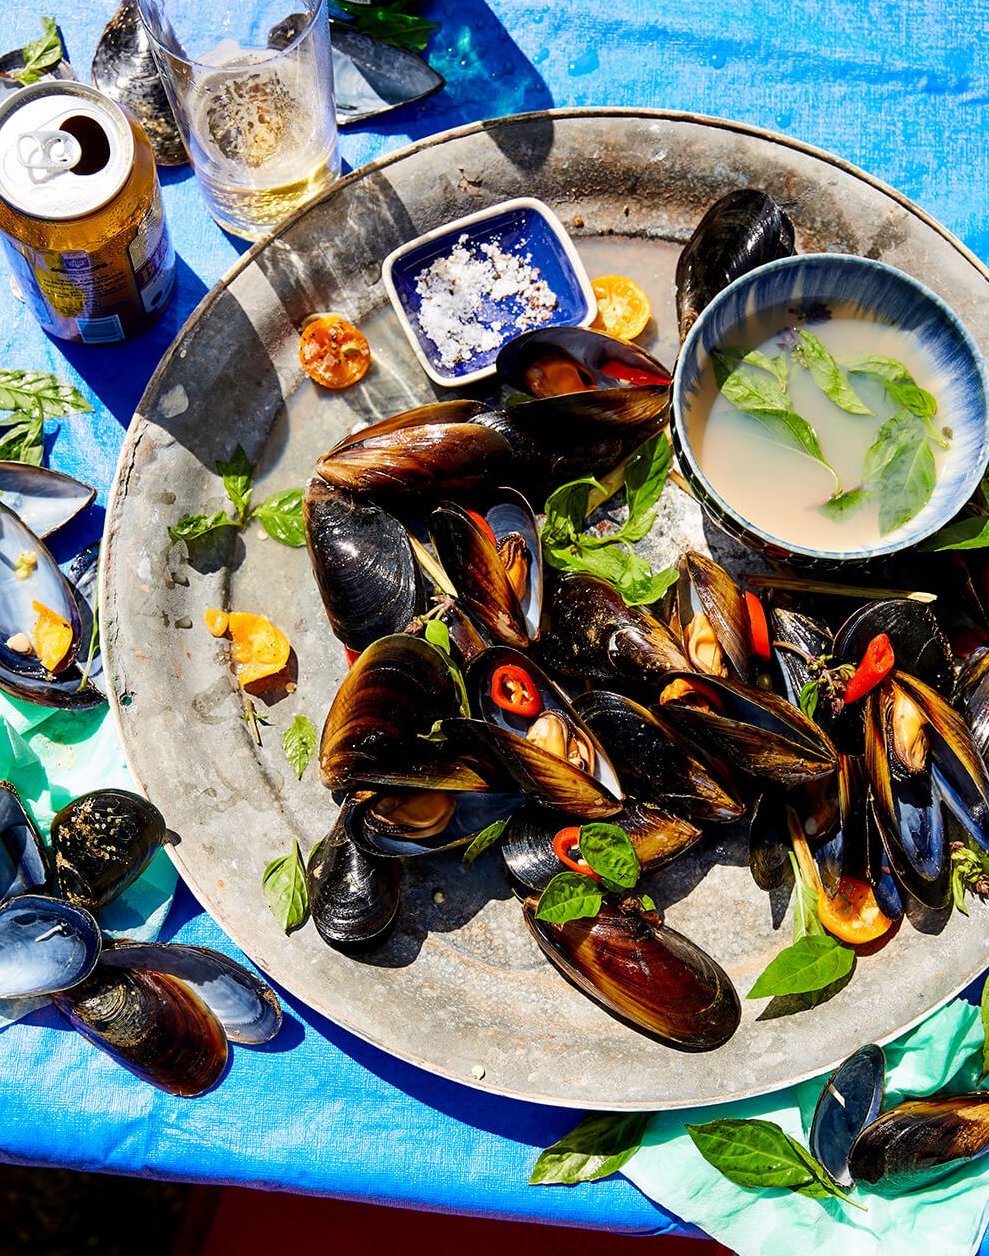 A plate of mussels on a bright blue tabletop, with salt and broth served on the side